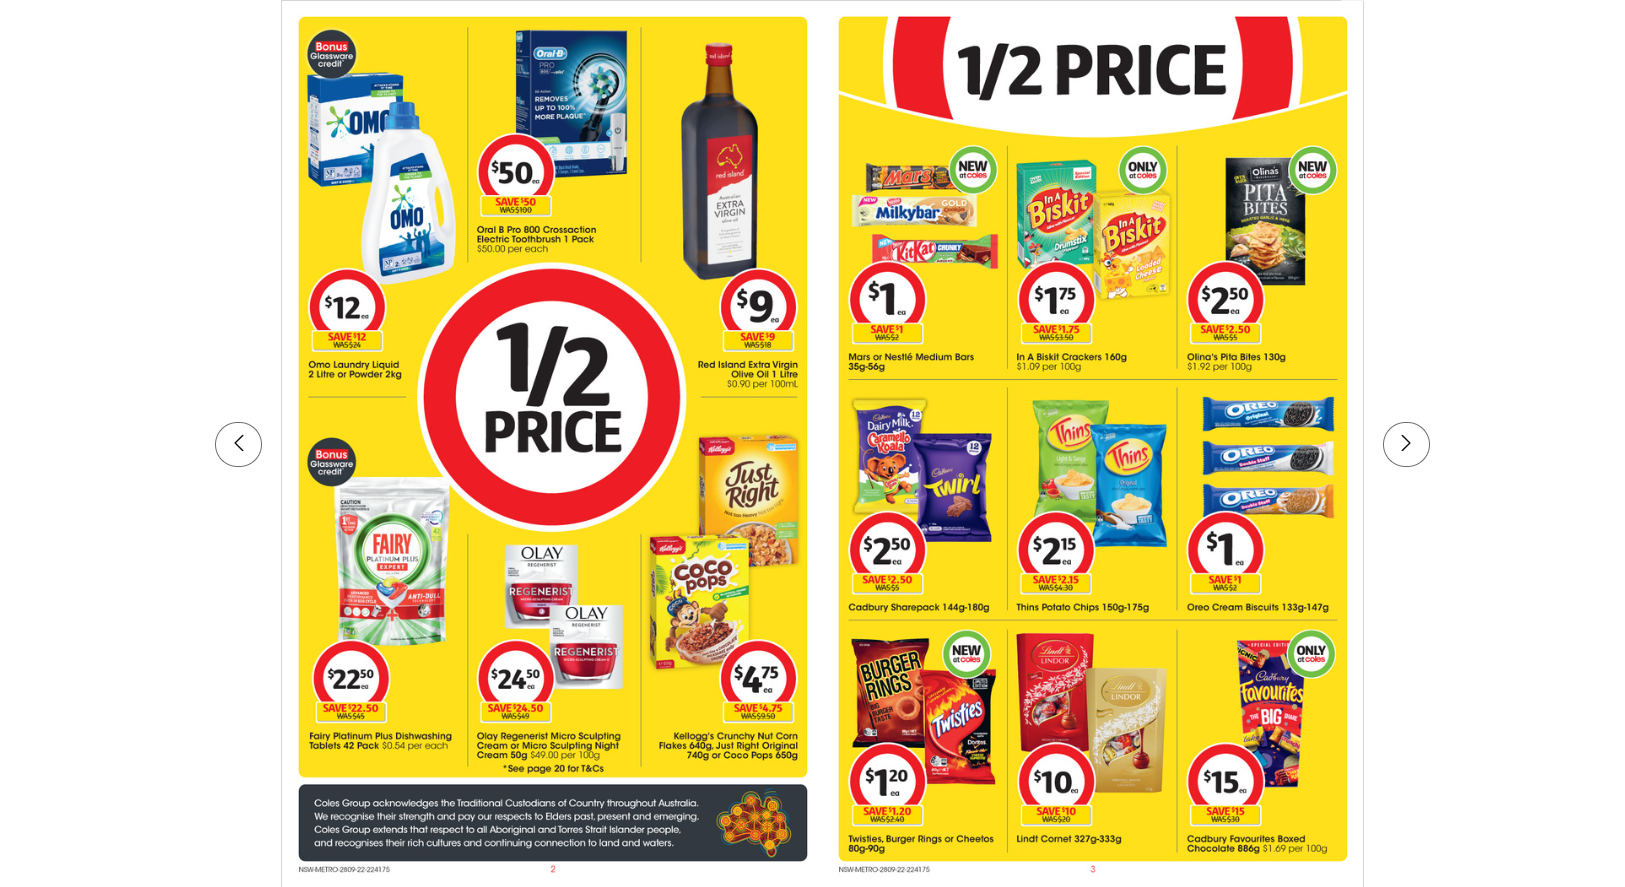 Coles this week's catalogue up to 50% OFF on groceries, beauty&everyday essentials(until 4th Oct)